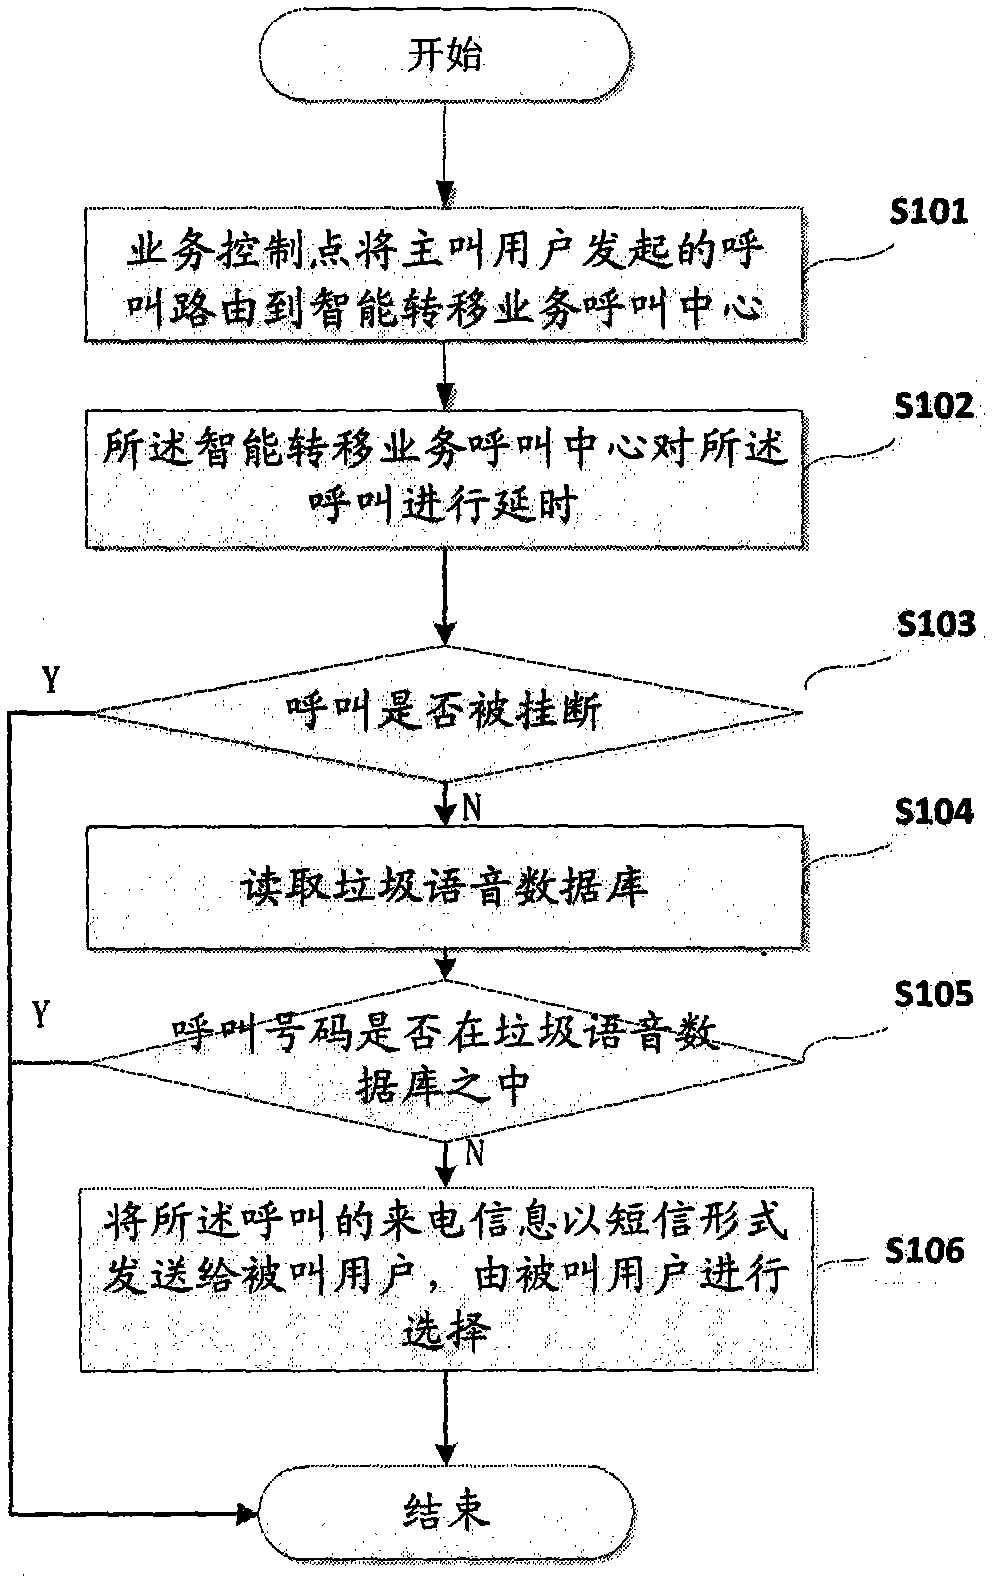 Method and system for preventing junk phone calls and intelligent transfer service call center